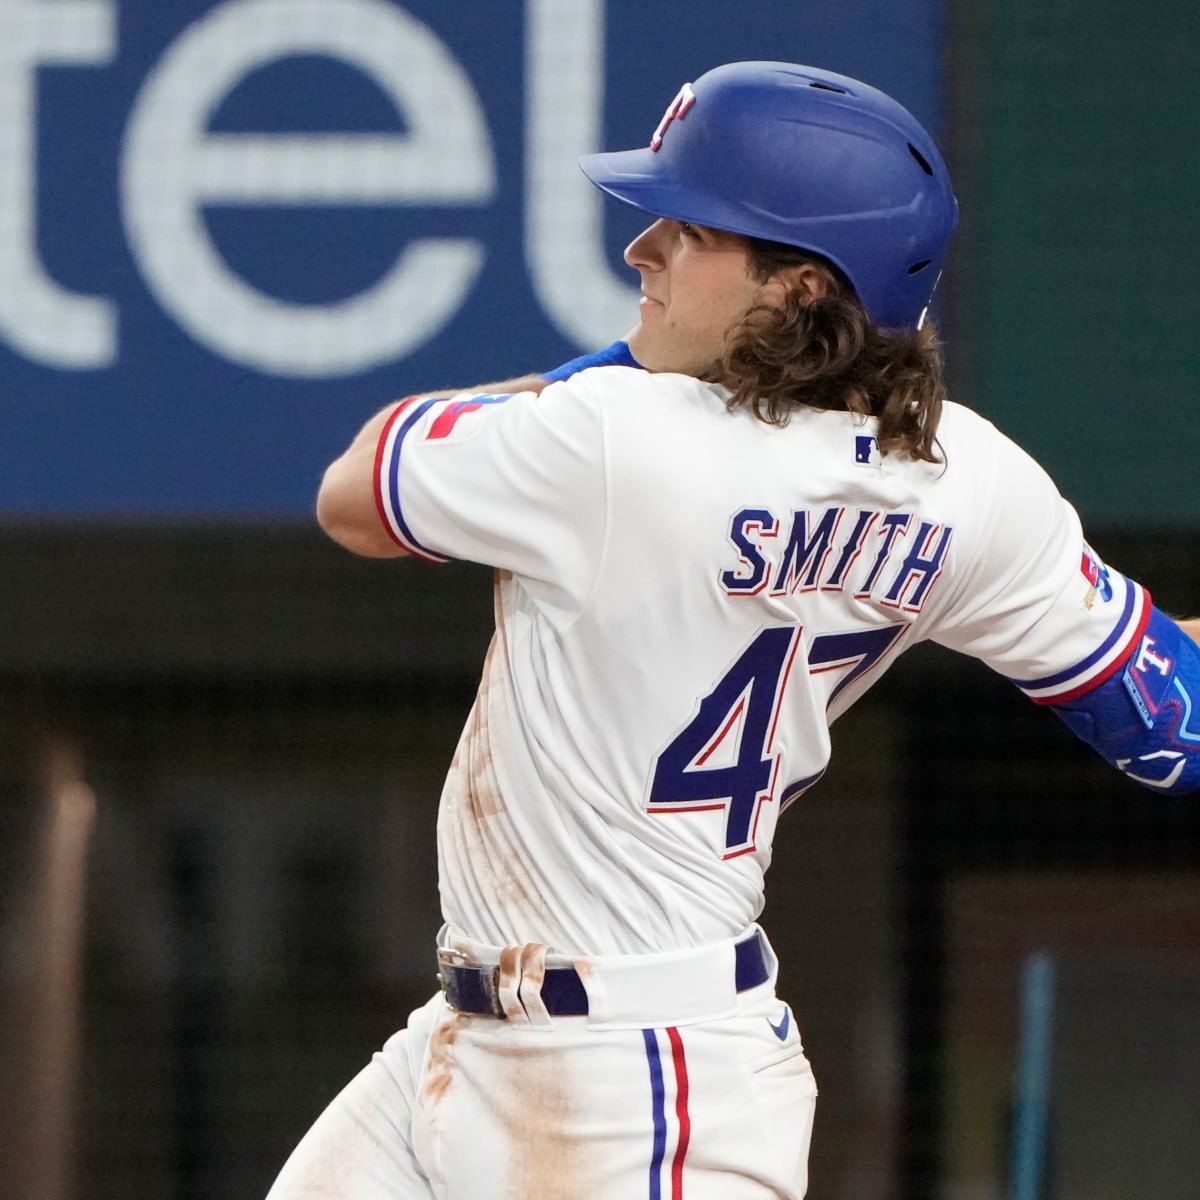 Josh Smith retools swing in offseason aiming to become Rangers